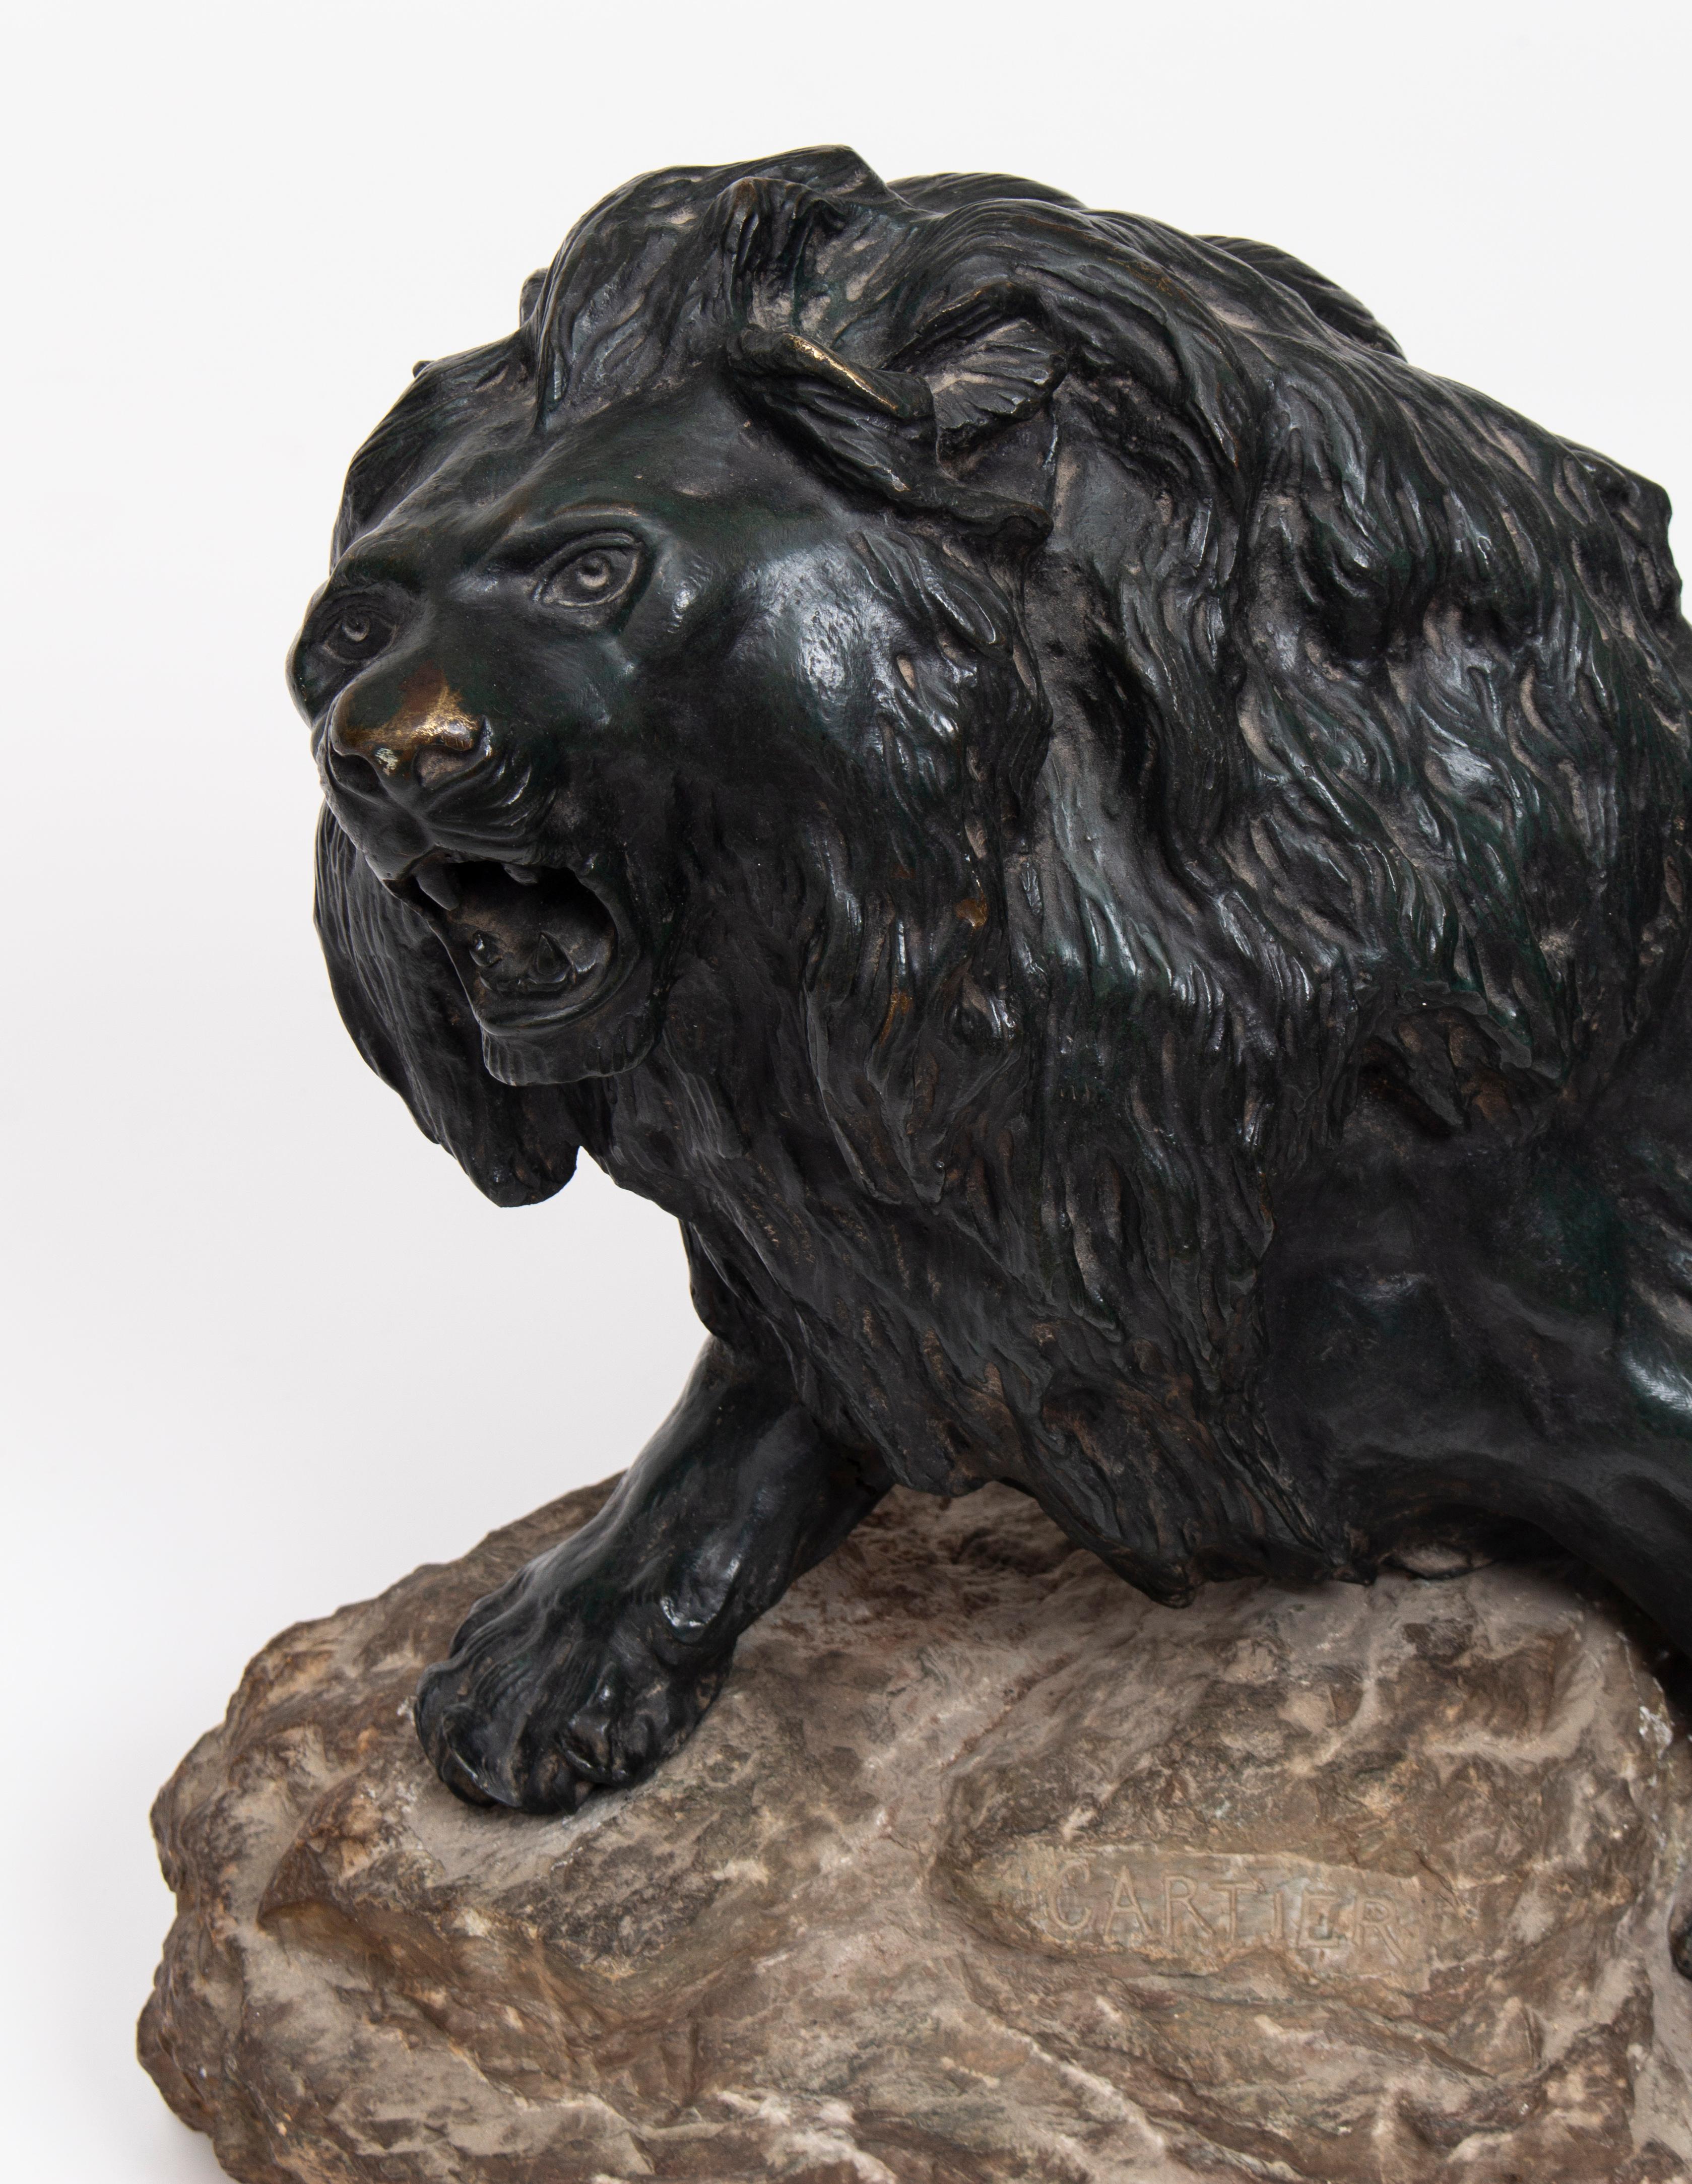 Thomas François Cartier, born on January 3, 1879, in Marseille, France, and passing away on December 27, 1943, was a notable French sculptor celebrated for his masterful depictions of animals, particularly lions. His artistic prowess lay in his